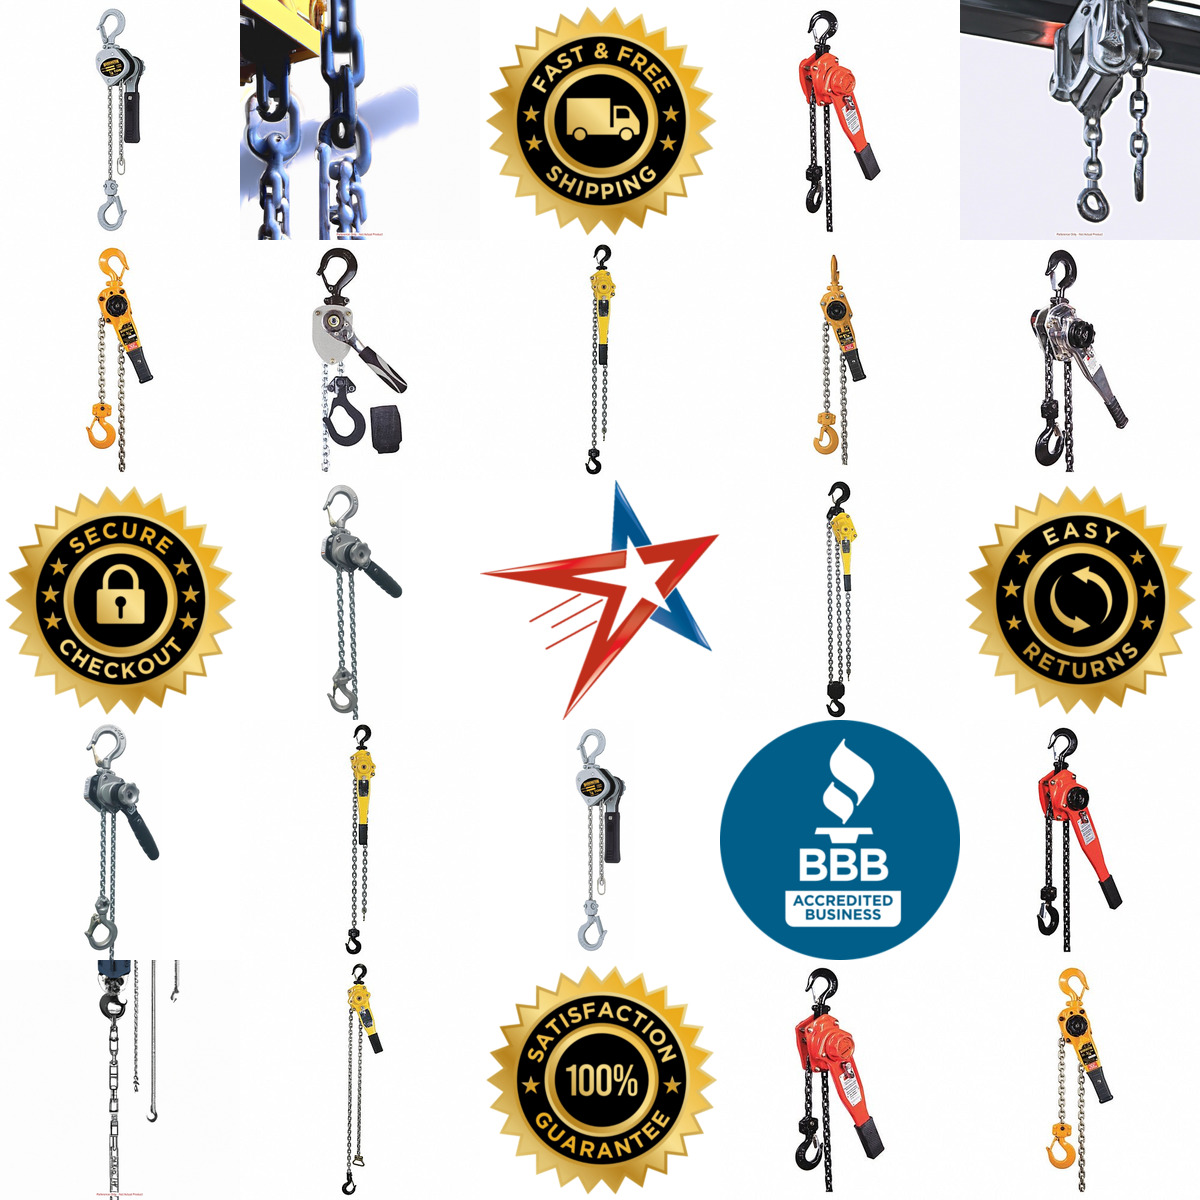 A selection of Lever Chain Hoists products on GoVets